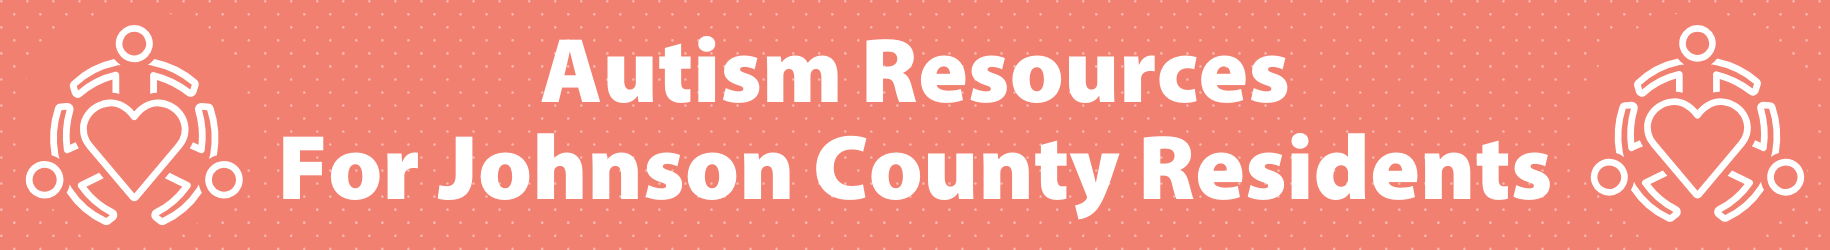 Autism Resources for Johnson County Residents